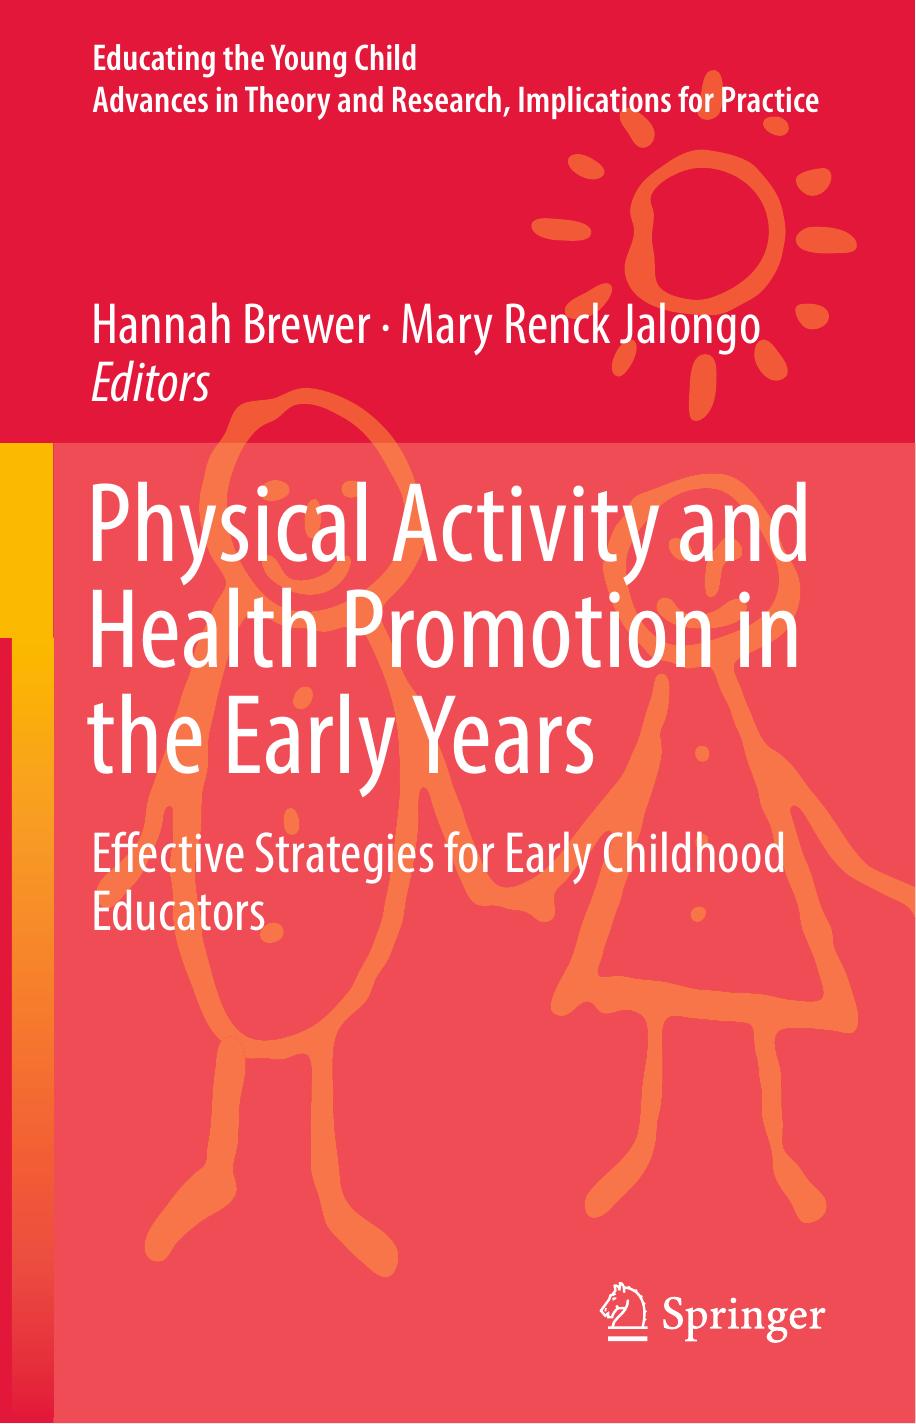 Physical Activity and Health Promotion in the Early Years  Effective Strategies for Early Childhood Educators 2018.pdf